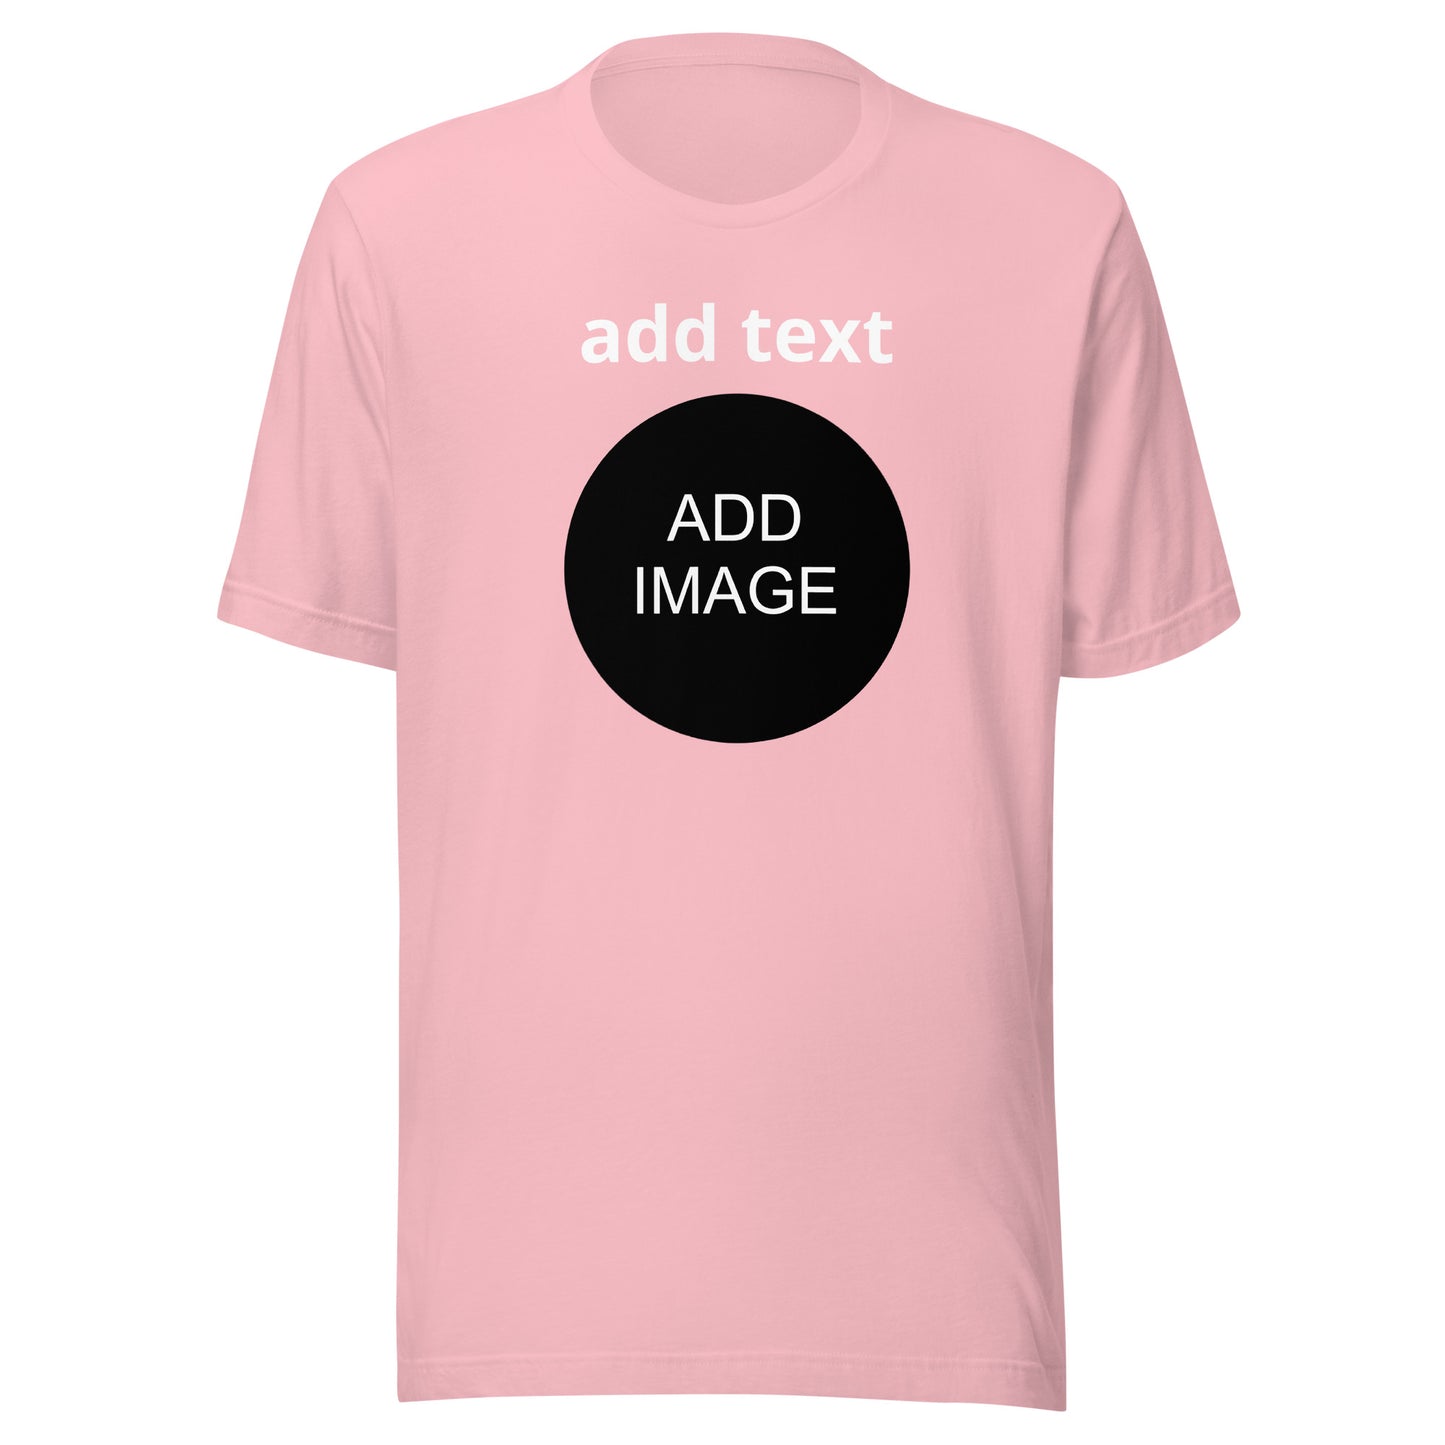 Small - Medium Unisex [front image and front white text]